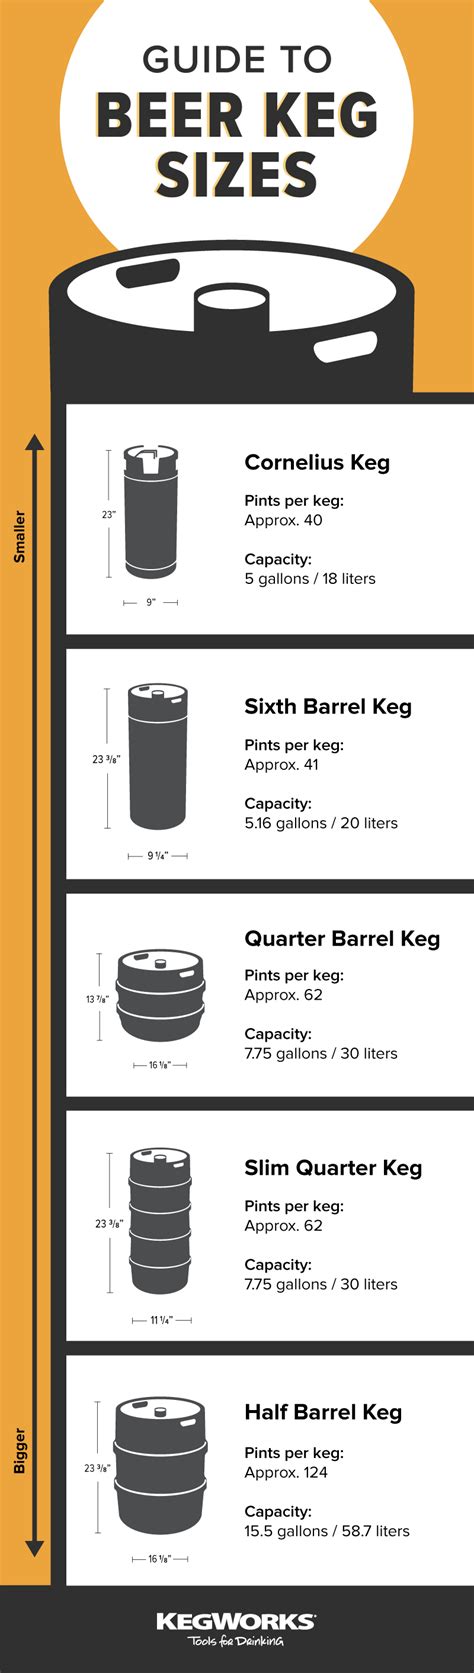 Guide To Beer Keg Sizes And Dimensions